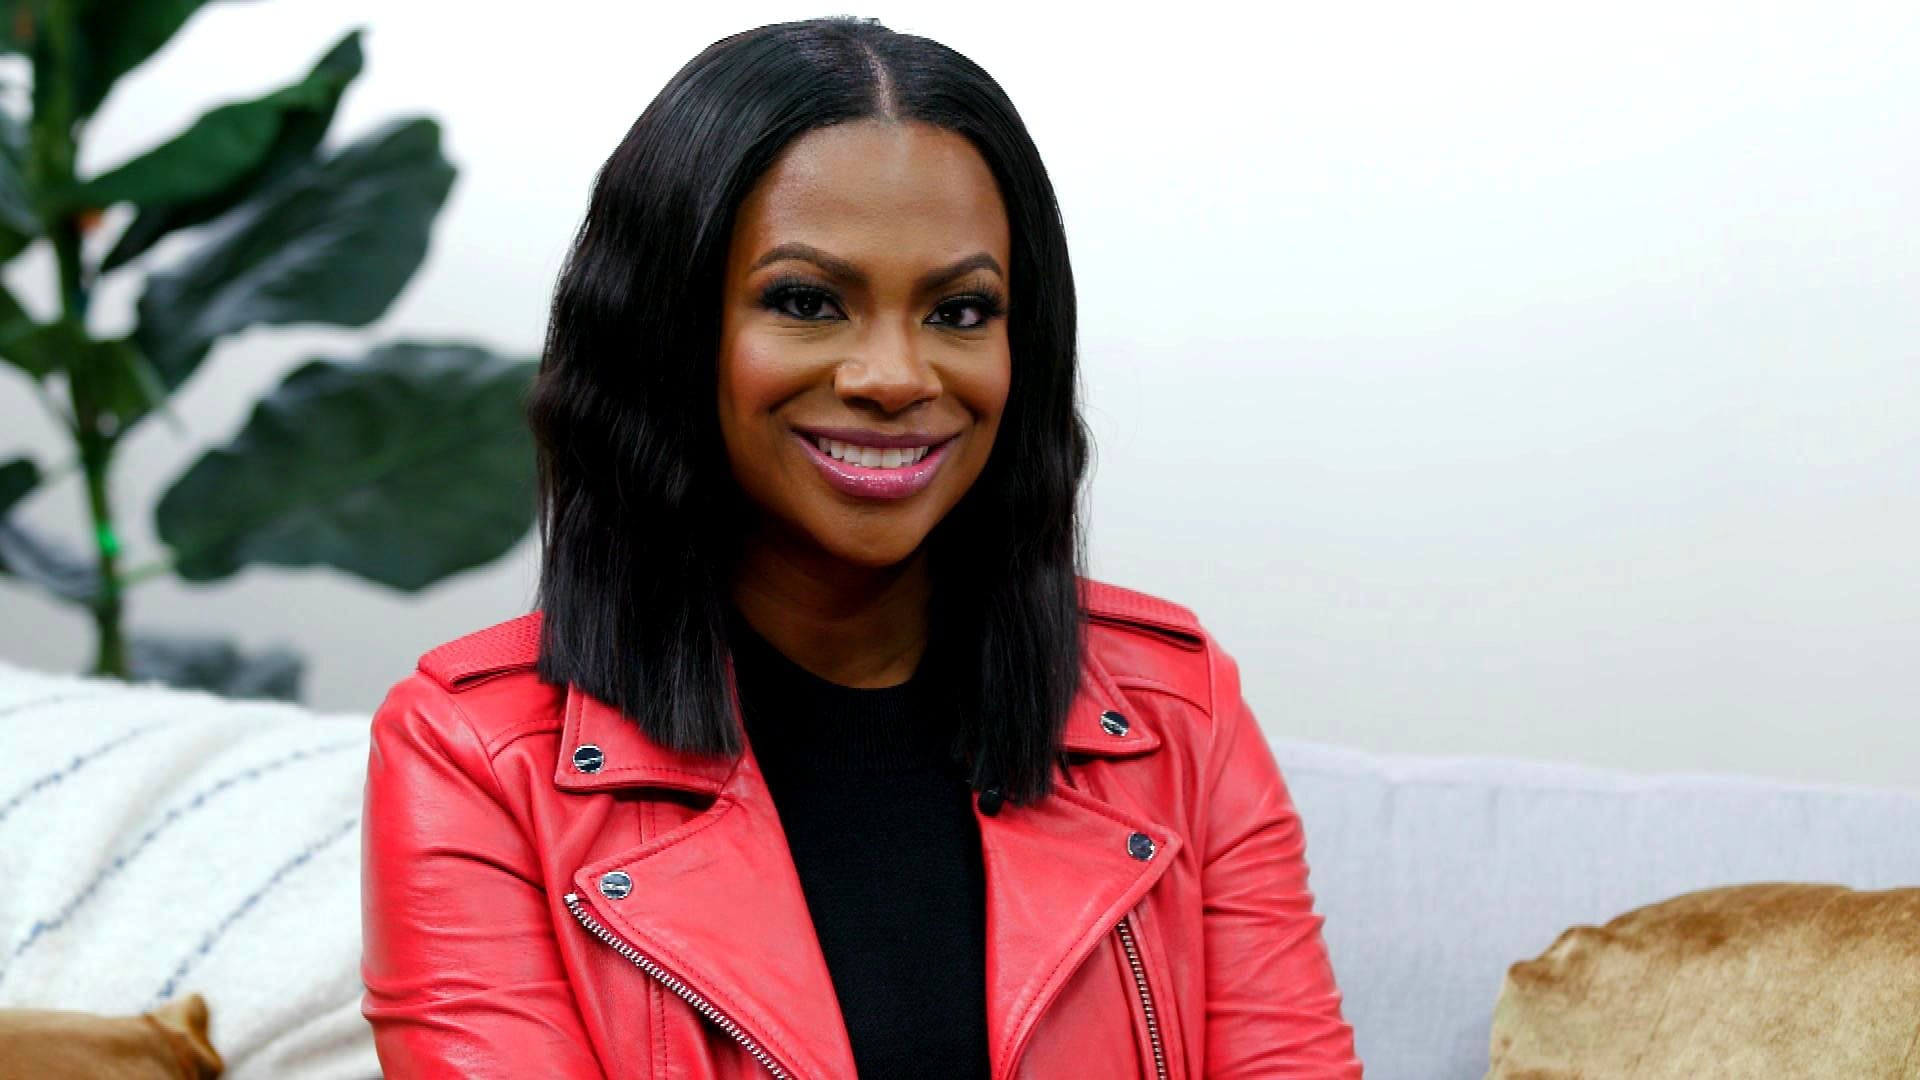 Kandi Burruss Learned How To Glow From The Inside Out